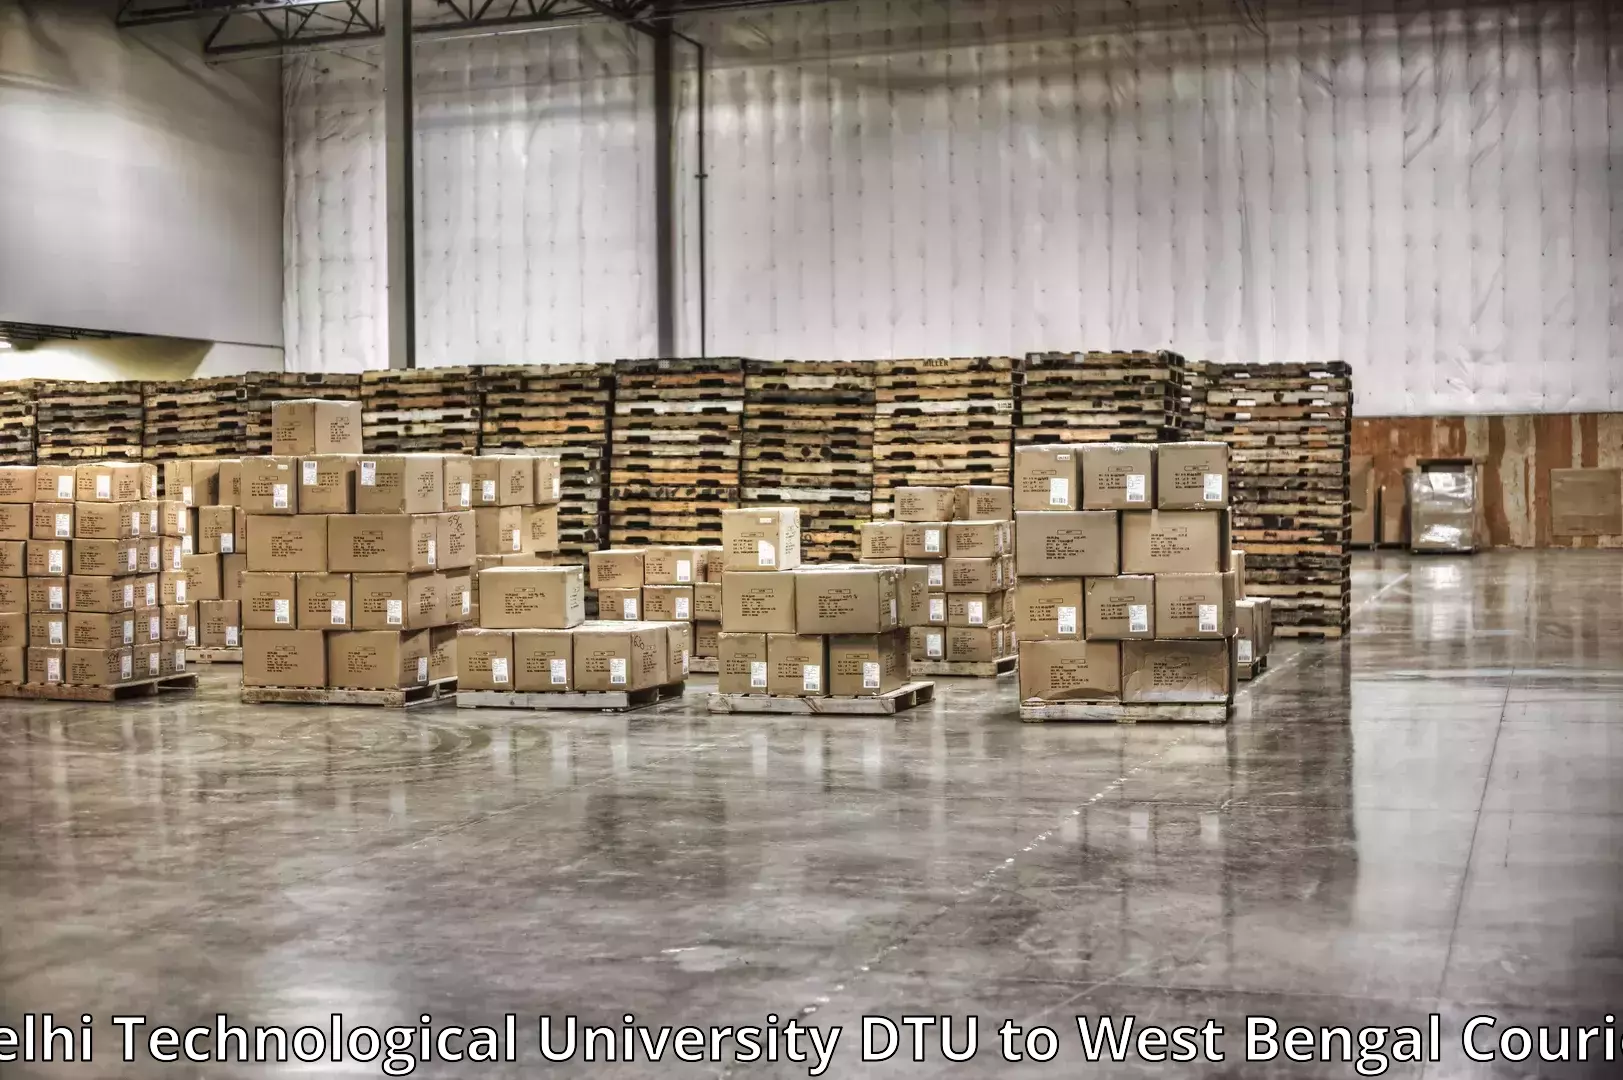 Moving and storage services Delhi Technological University DTU to West Bengal